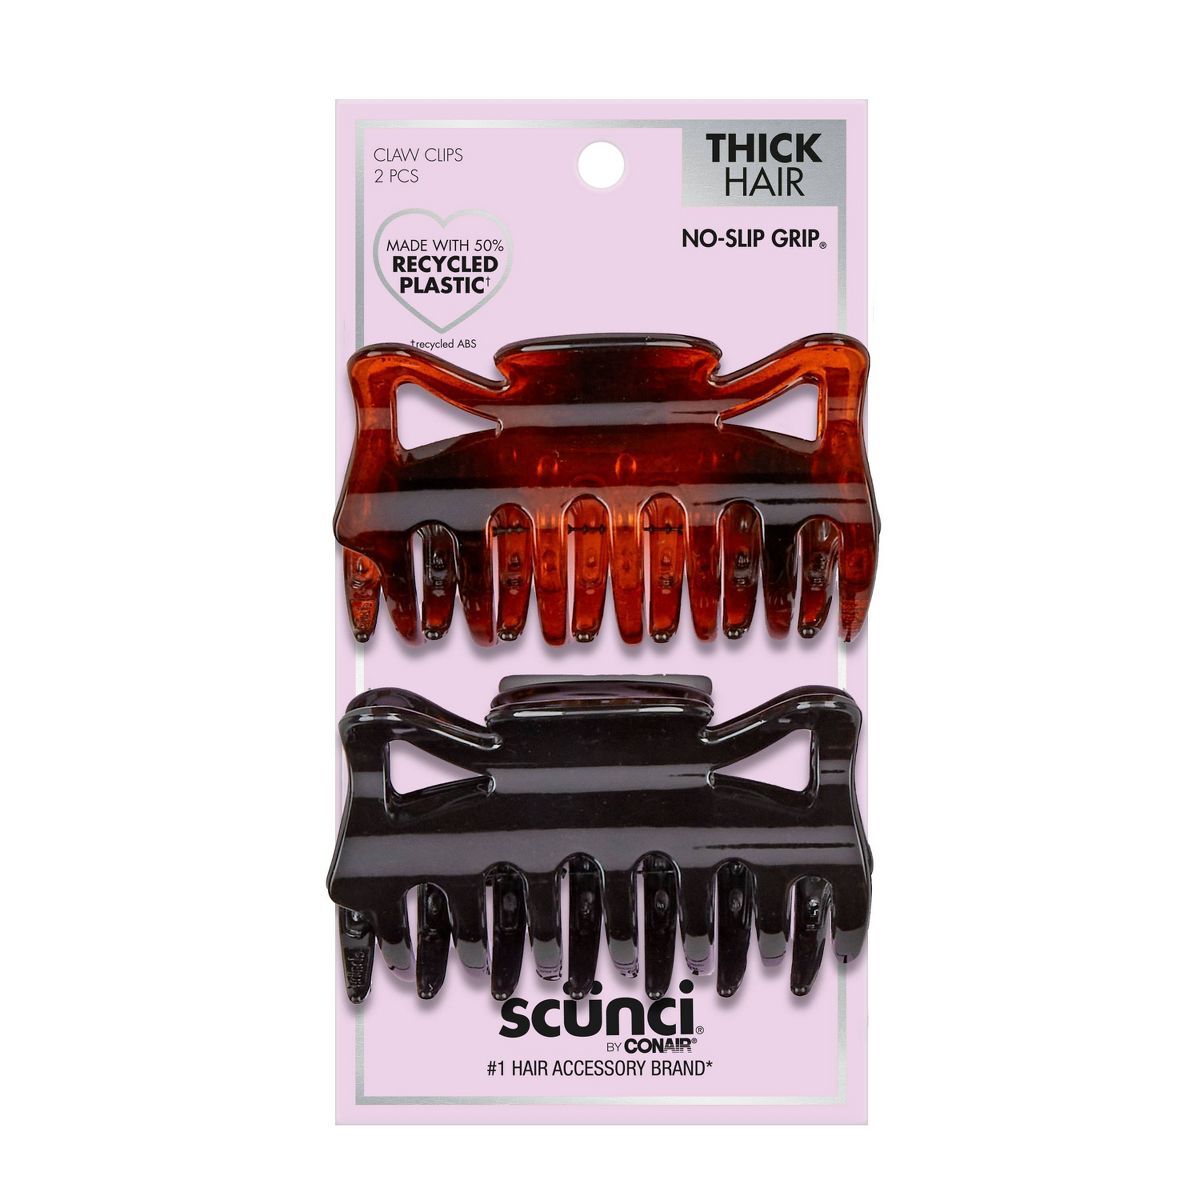 scünci No-Slip Grip Recycled Claw Clips - Tortoise/Black  - Thick Hair - 2pk | Target